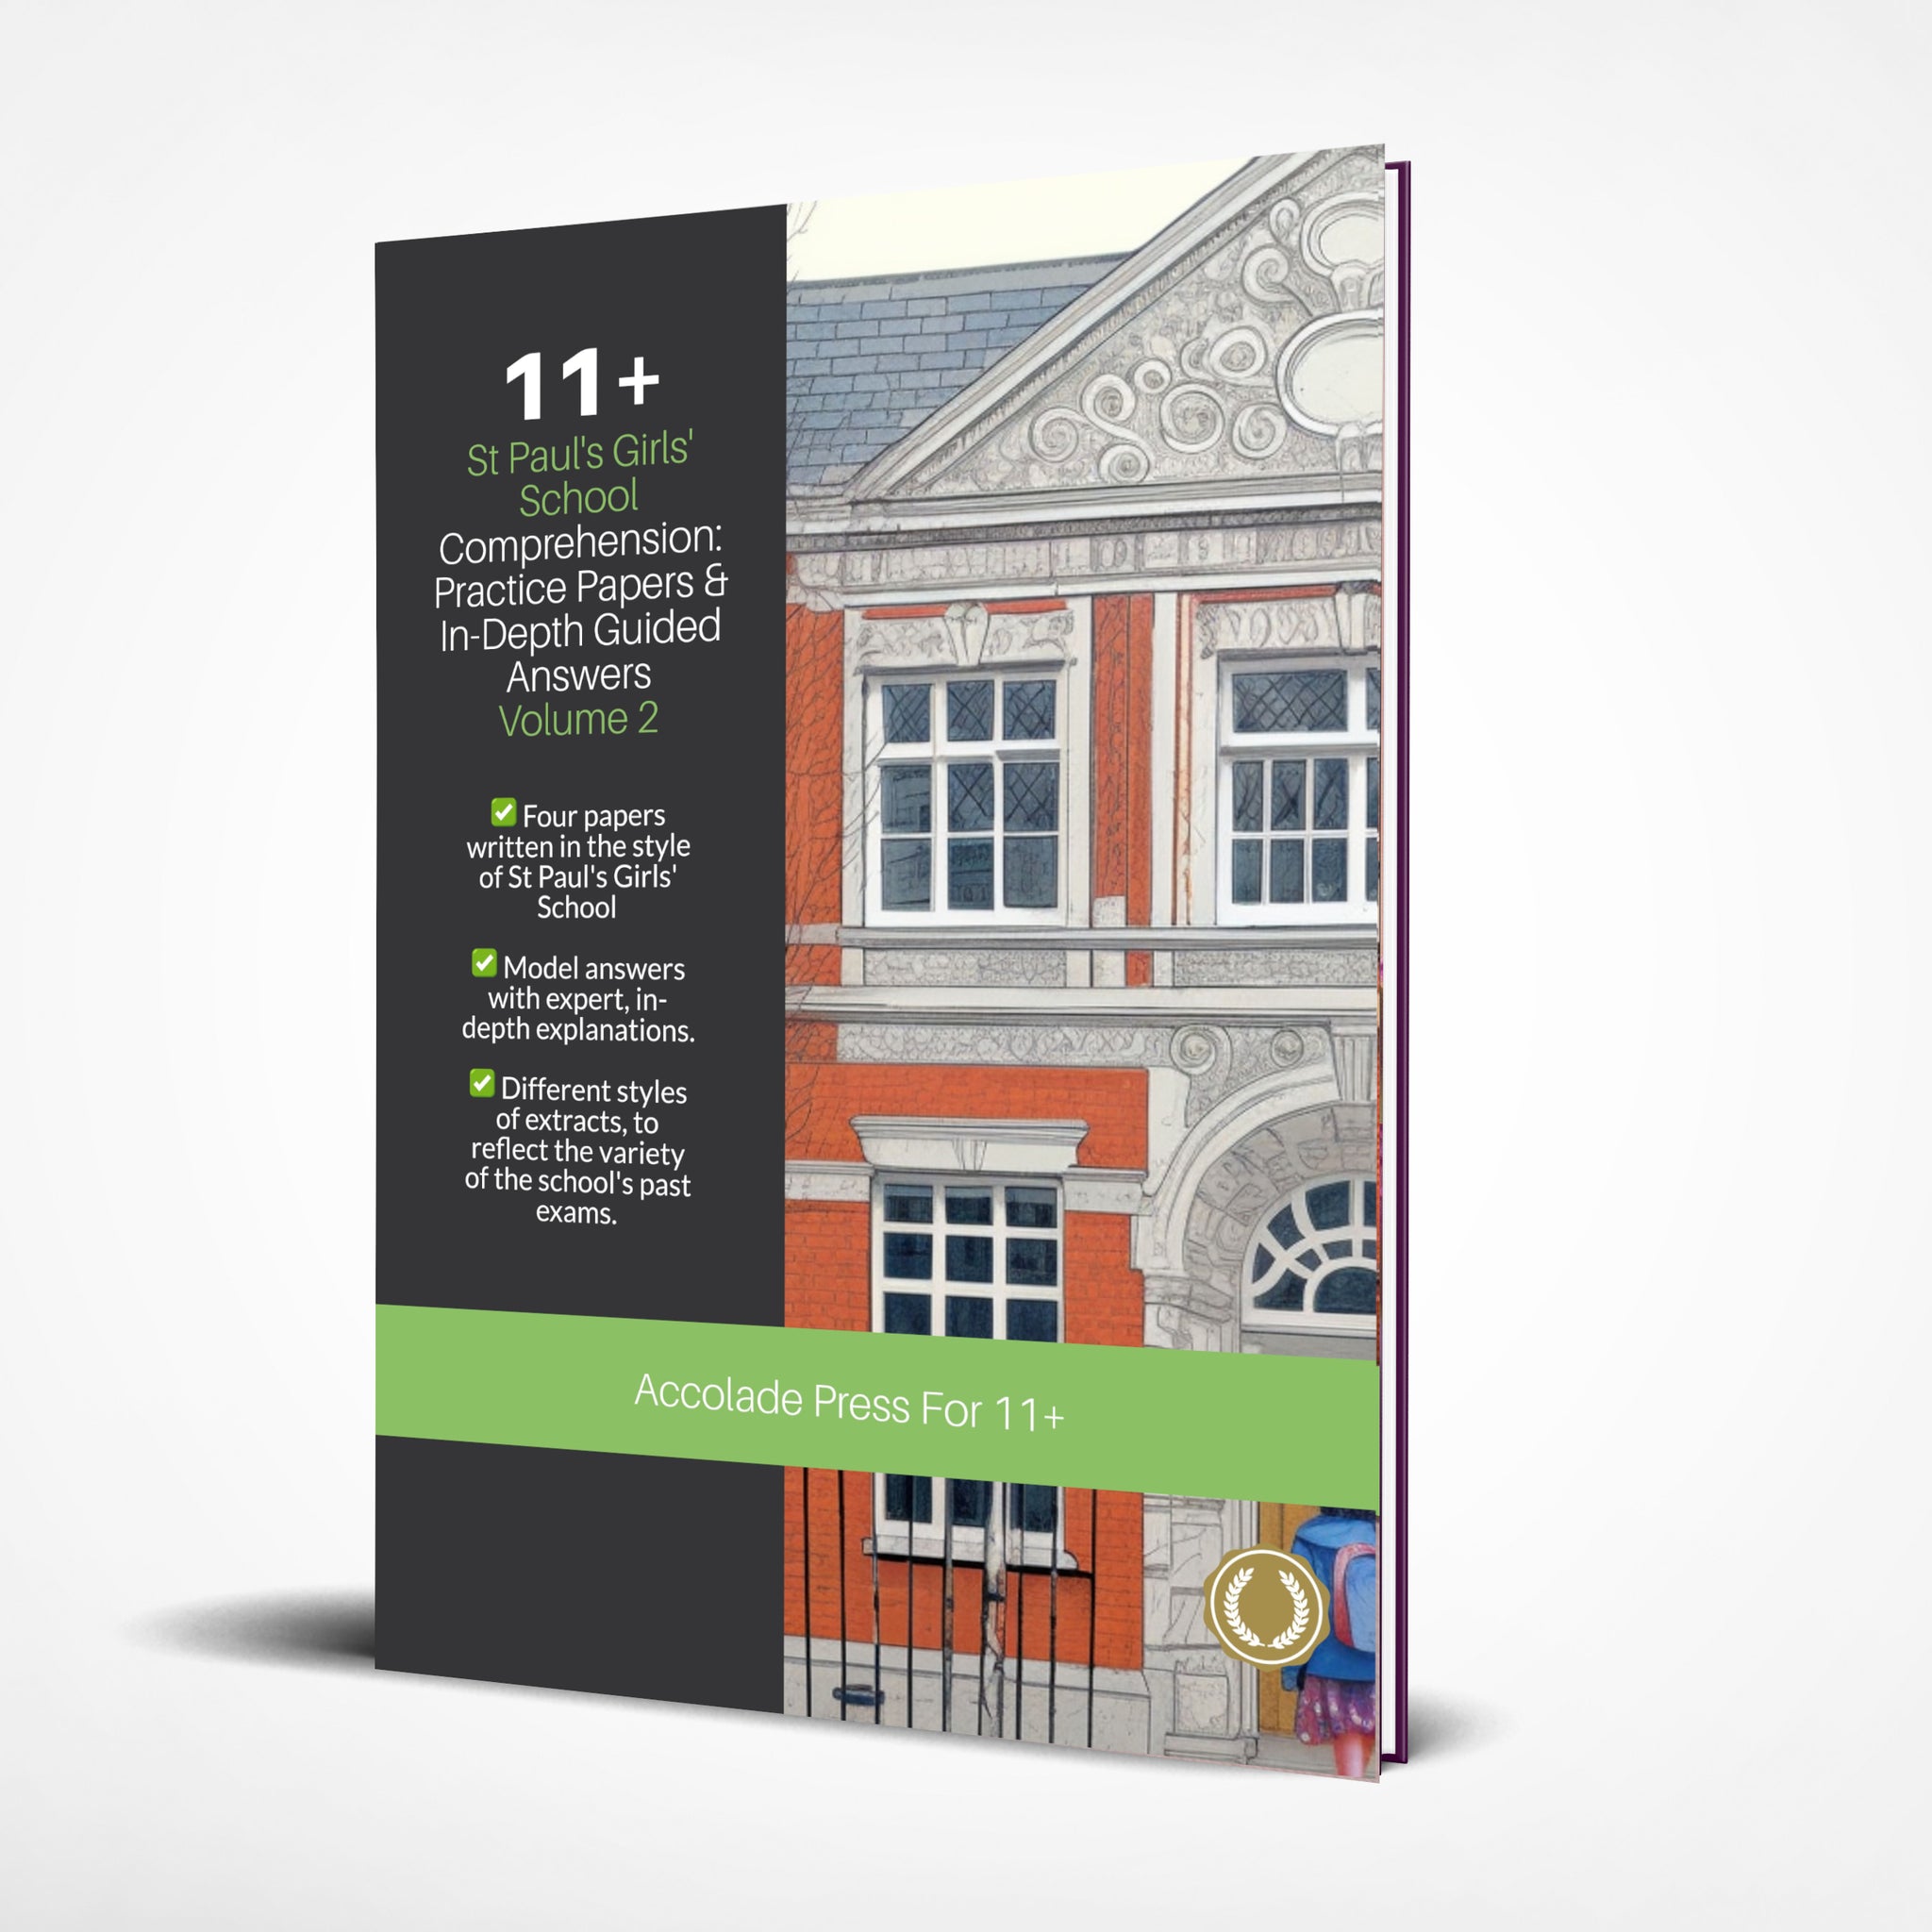 11+ Comprehension, St Paul's Girls' School: Practice Papers & In-Depth Guided Answers: Volume 2